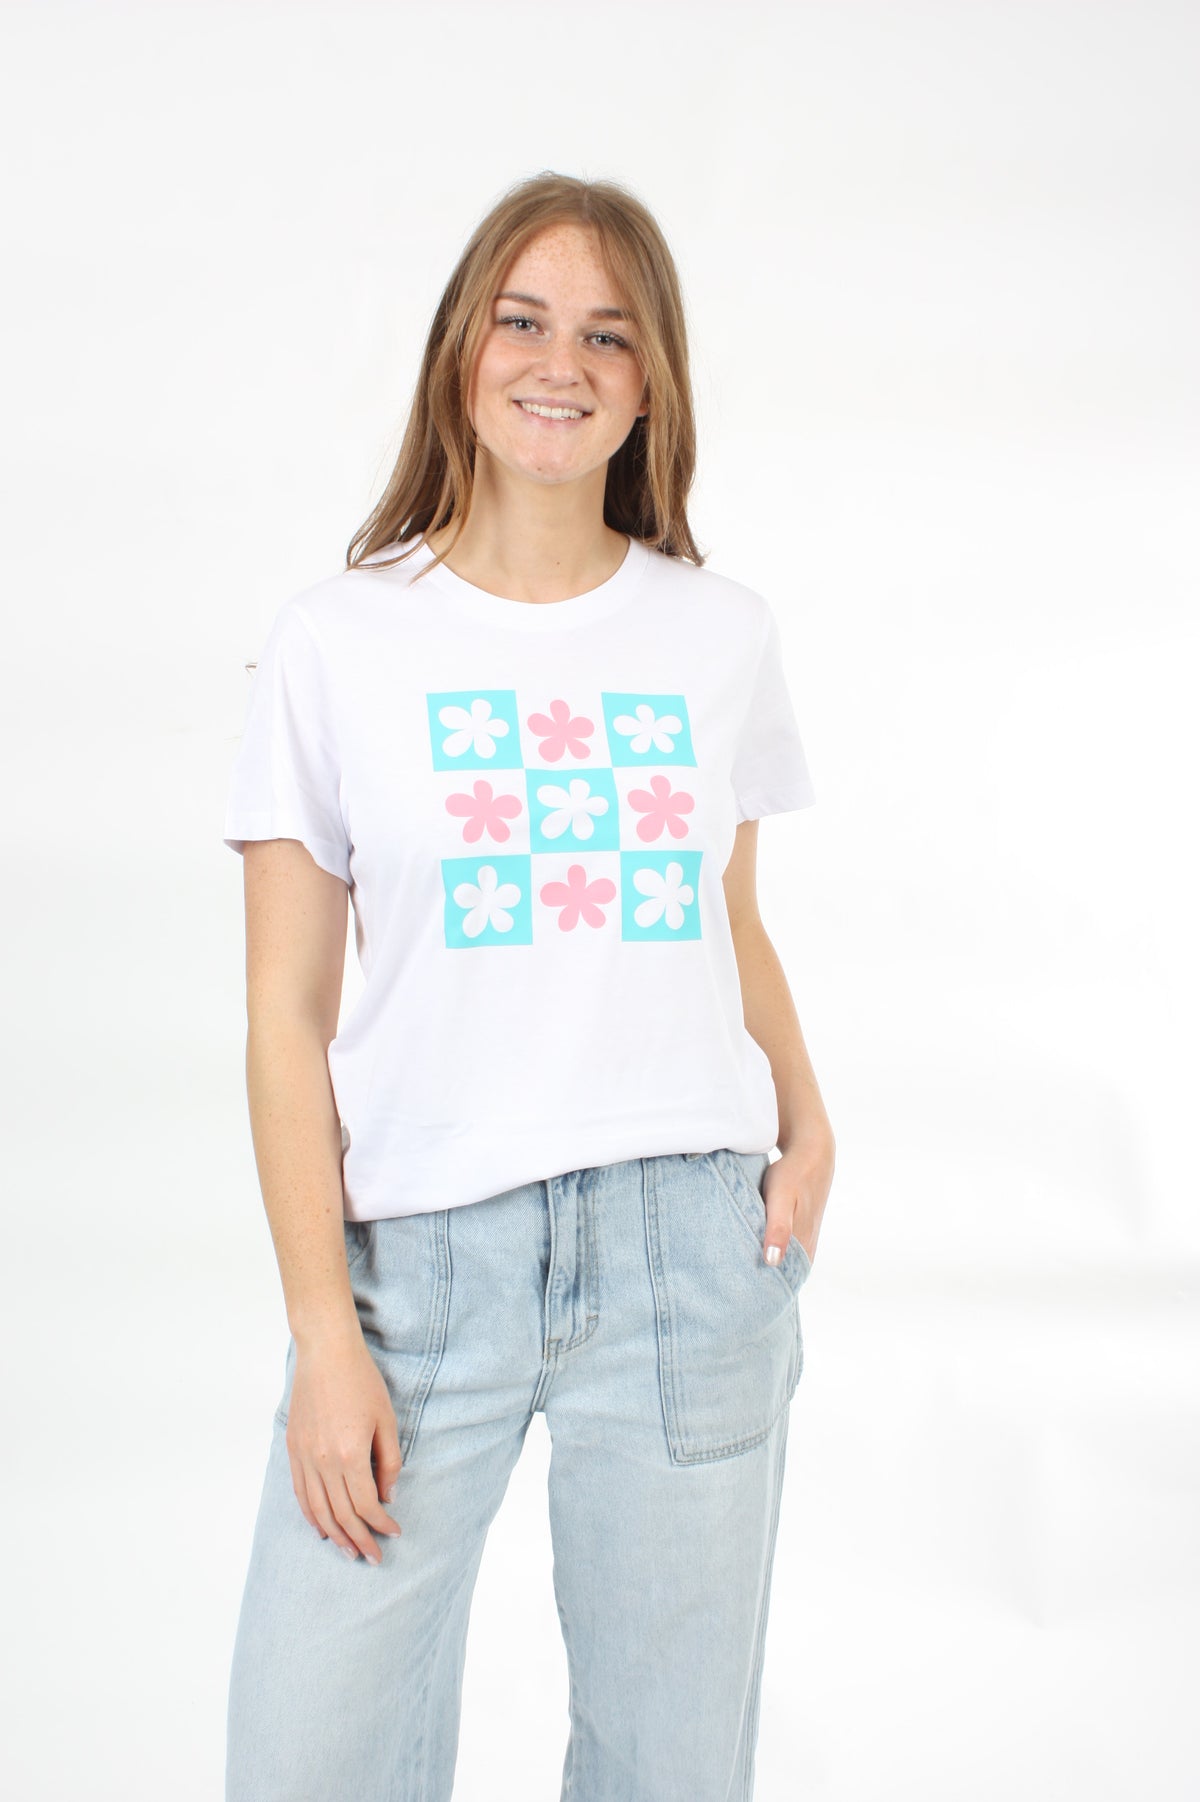 Tee Shirt - White - Pink and Turquoise Checked Daisy's Print - Pre Order